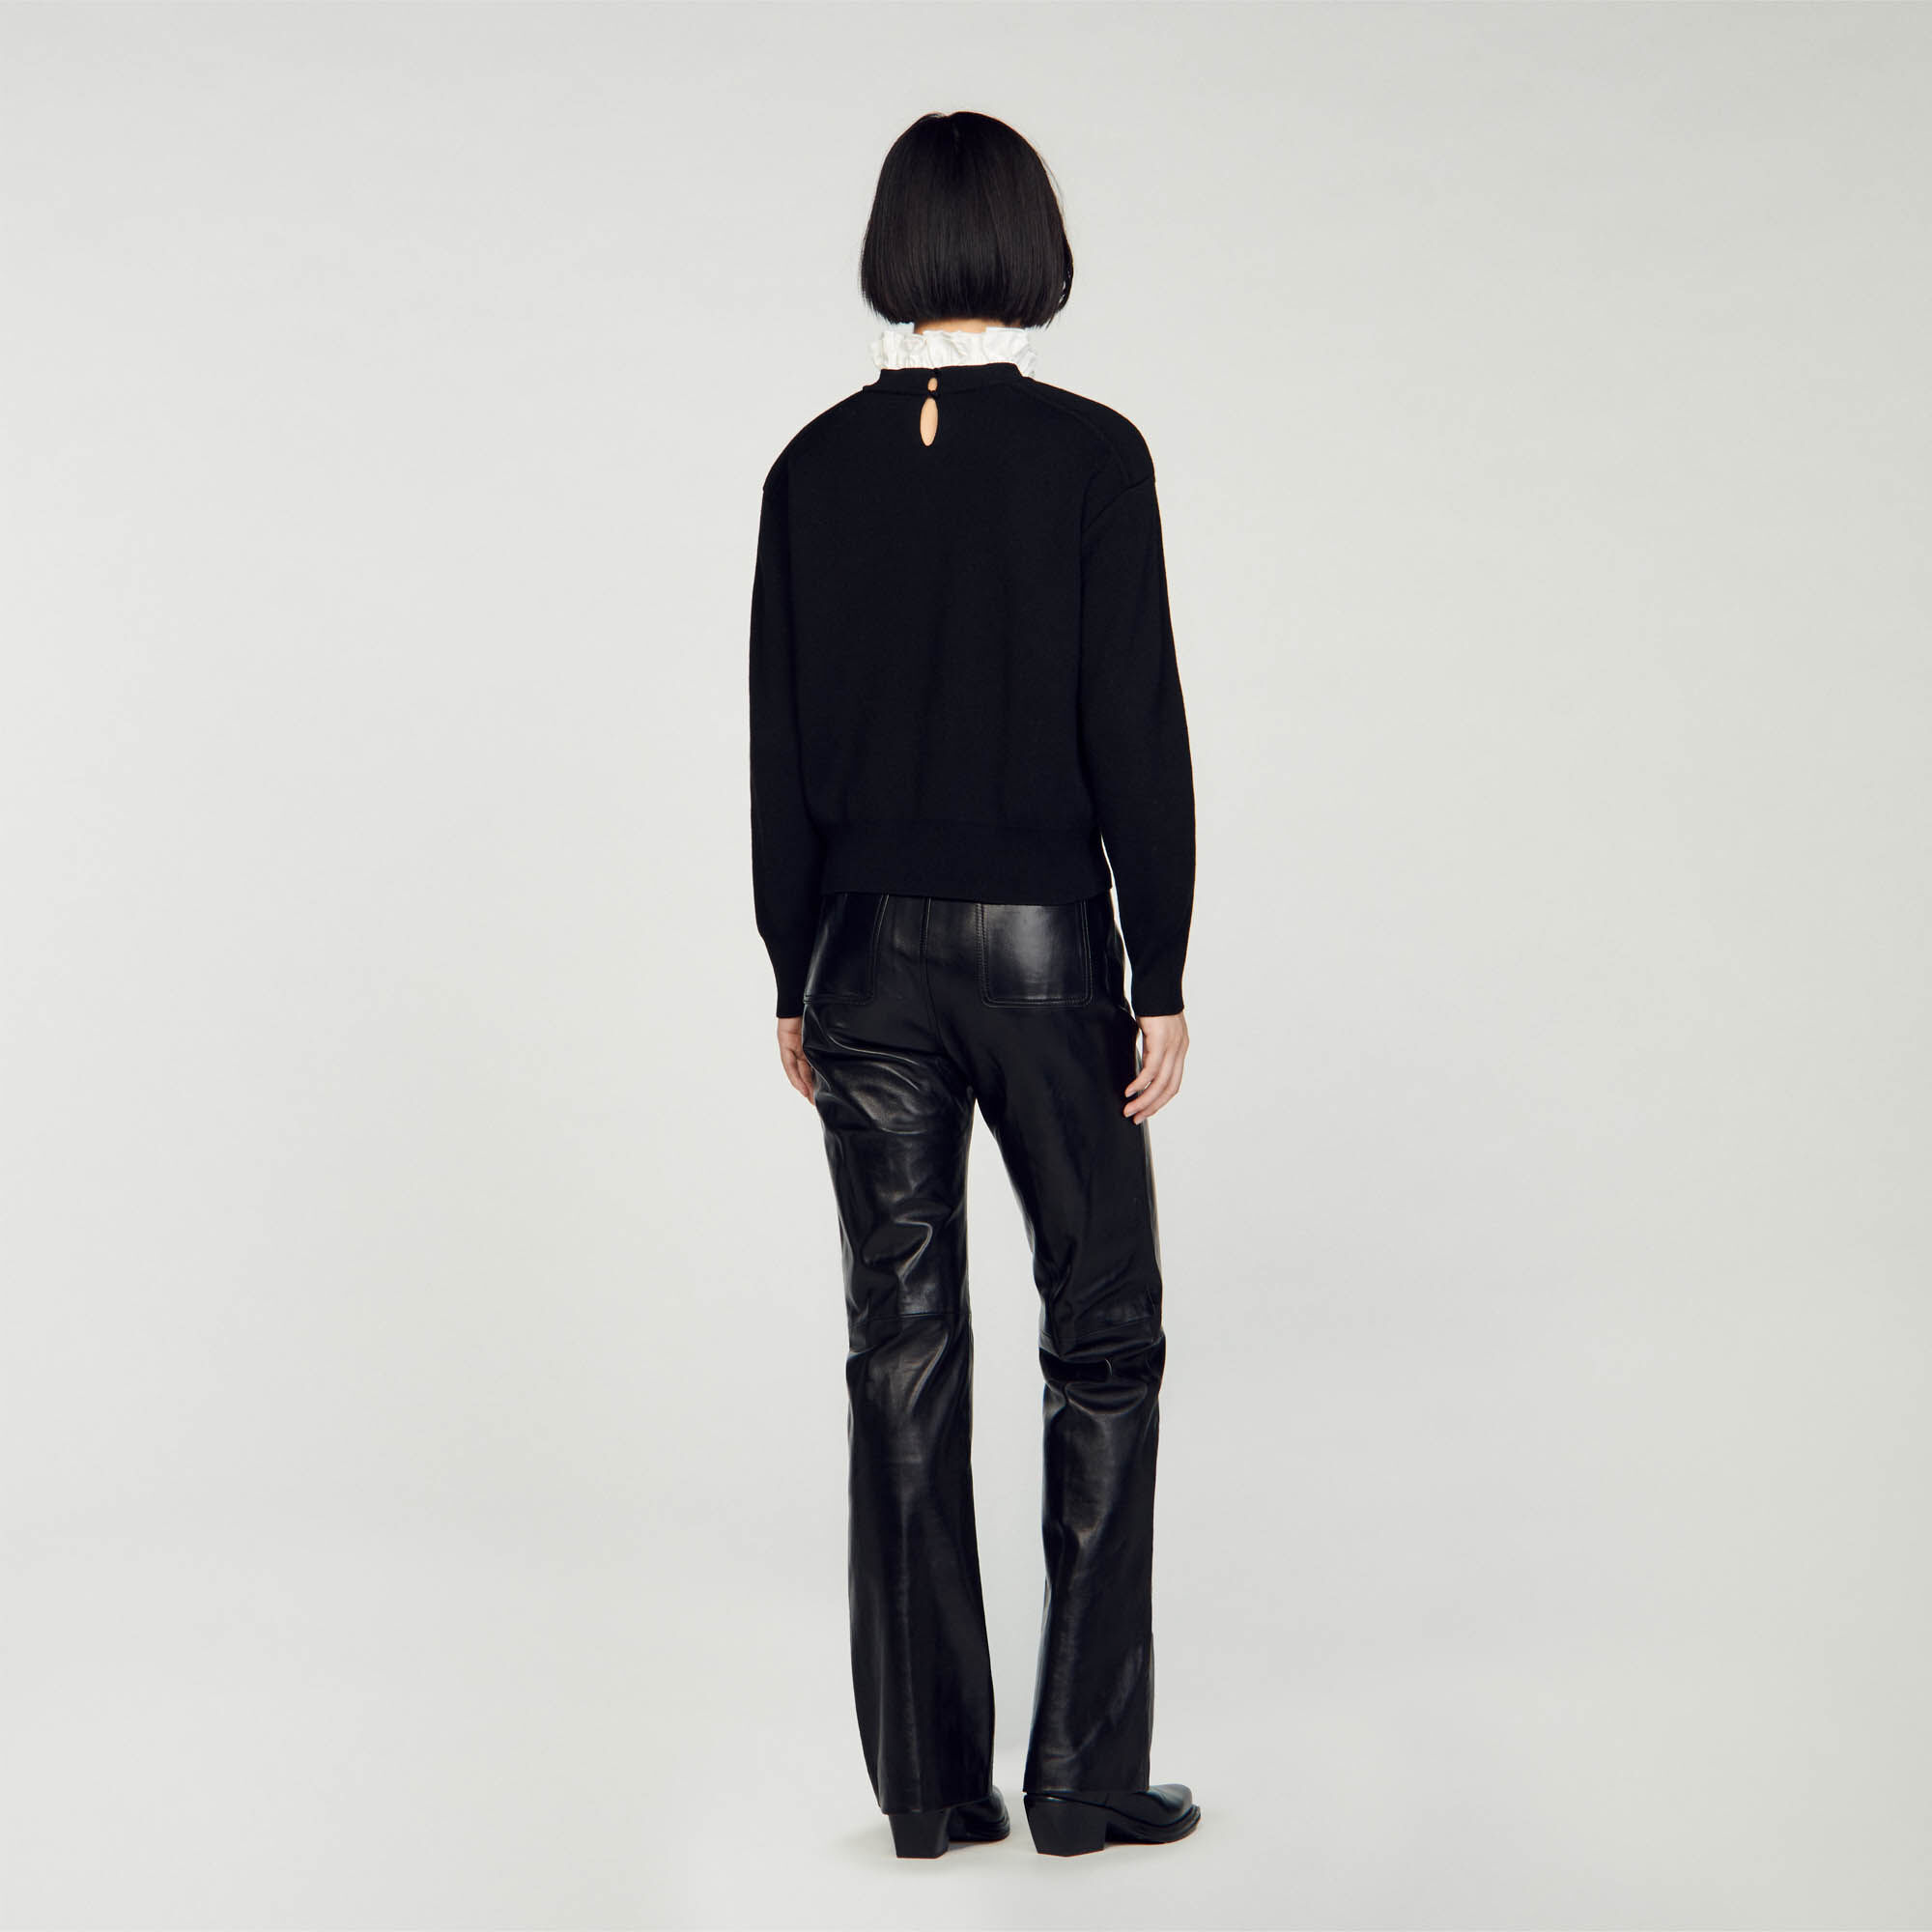 Knitted jumper with high neck Black / Gray | Sandro Paris